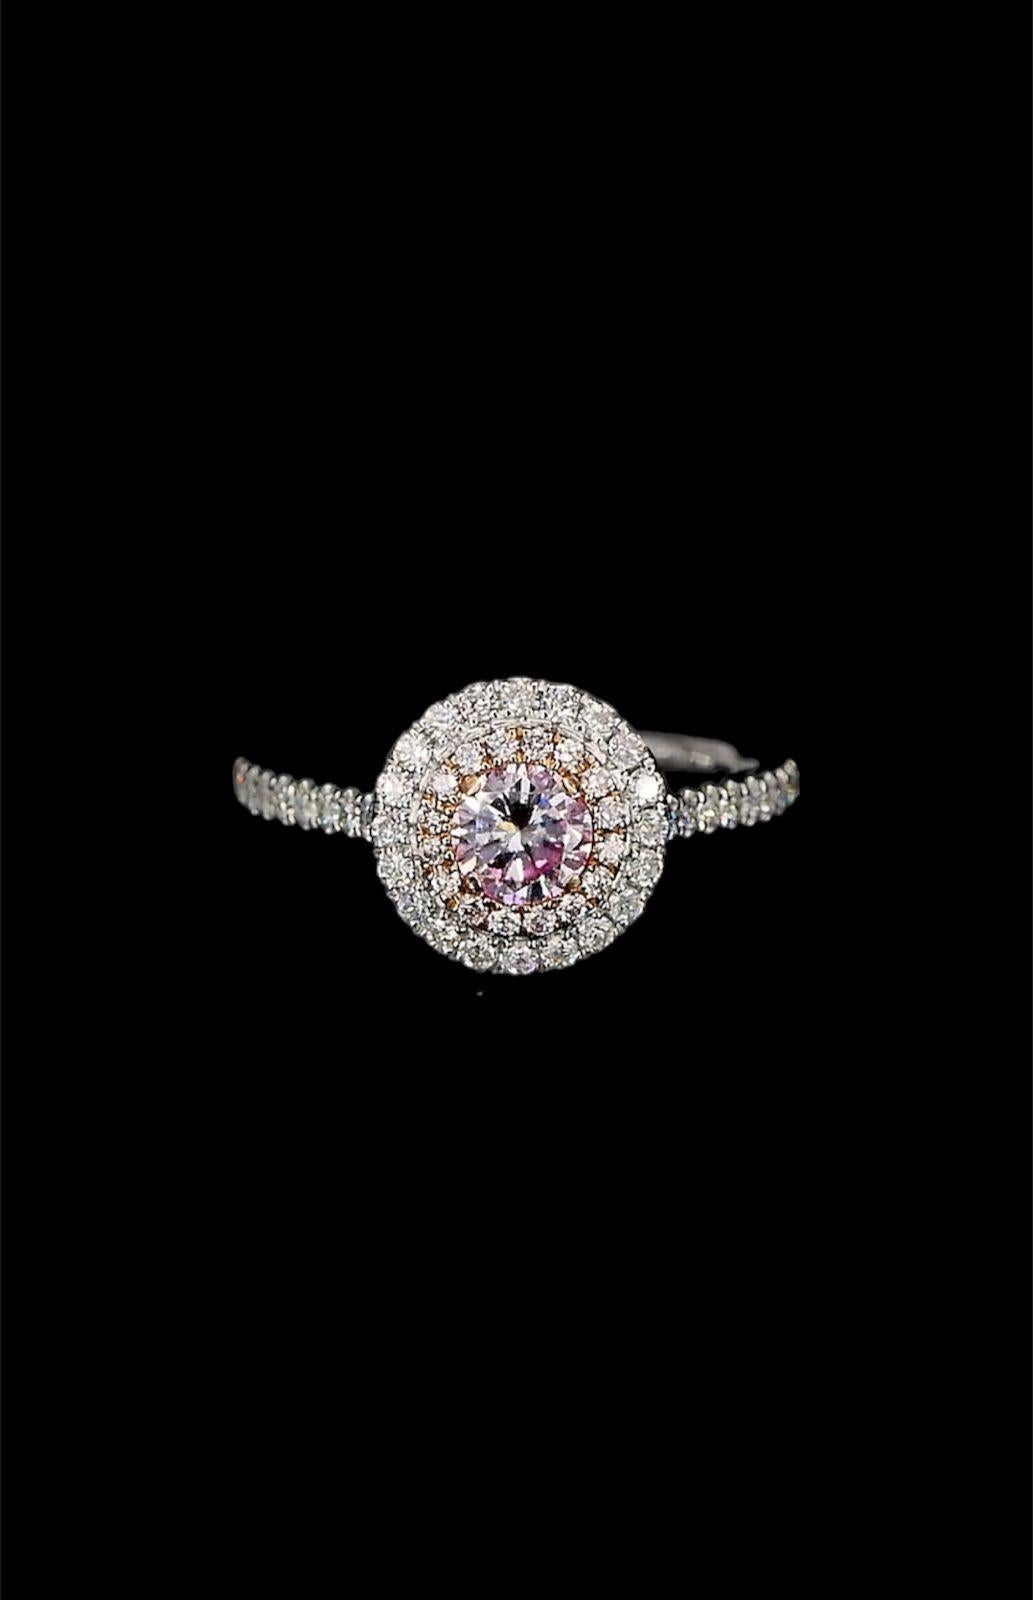 **100% NATURAL FANCY COLOUR DIAMOND JEWELRY**

✪ Jewelry Details ✪

♦ MAIN STONE DETAILS

➛ Stone Shape: Round
➛ Stone Color: Fancy light pink
➛ Stone Clarity: VS
➛ Stone Weight: 0.353 carats
➛ AGL certified

♦ SIDE STONE DETAILS

➛ Side white